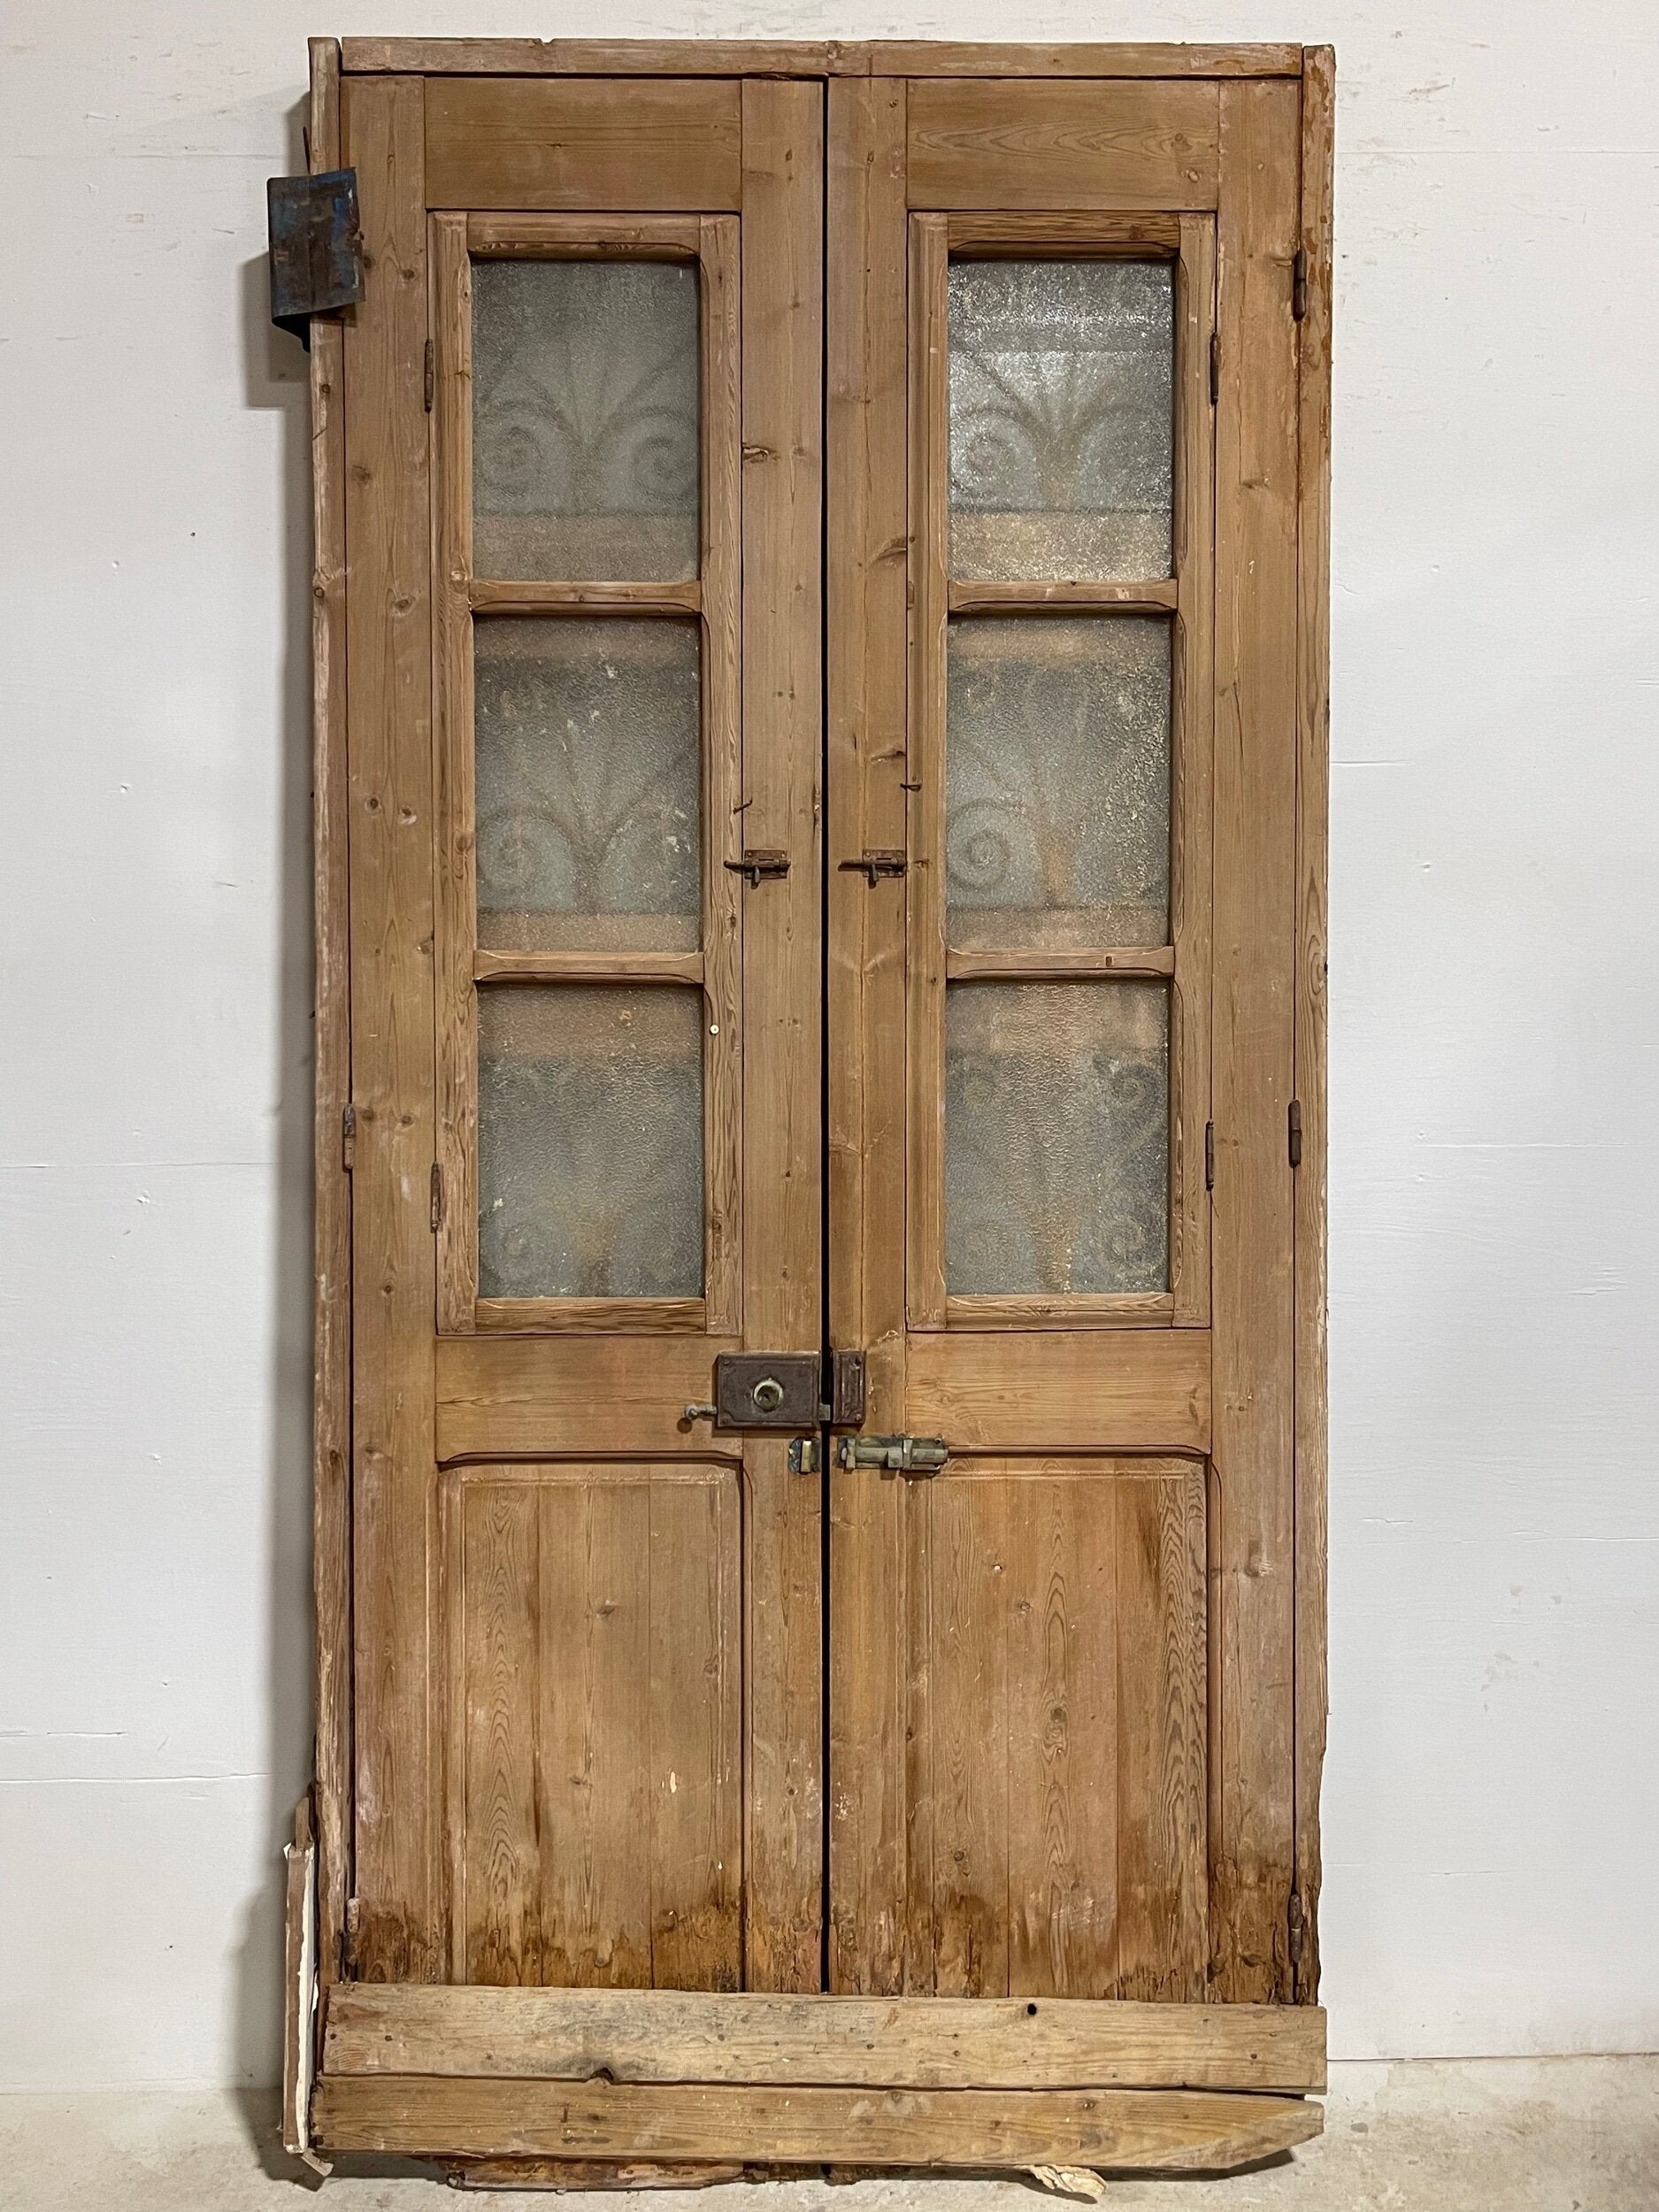 Antique French door with iron in a frame (F 100x47.5) (D 98x44) H0254s